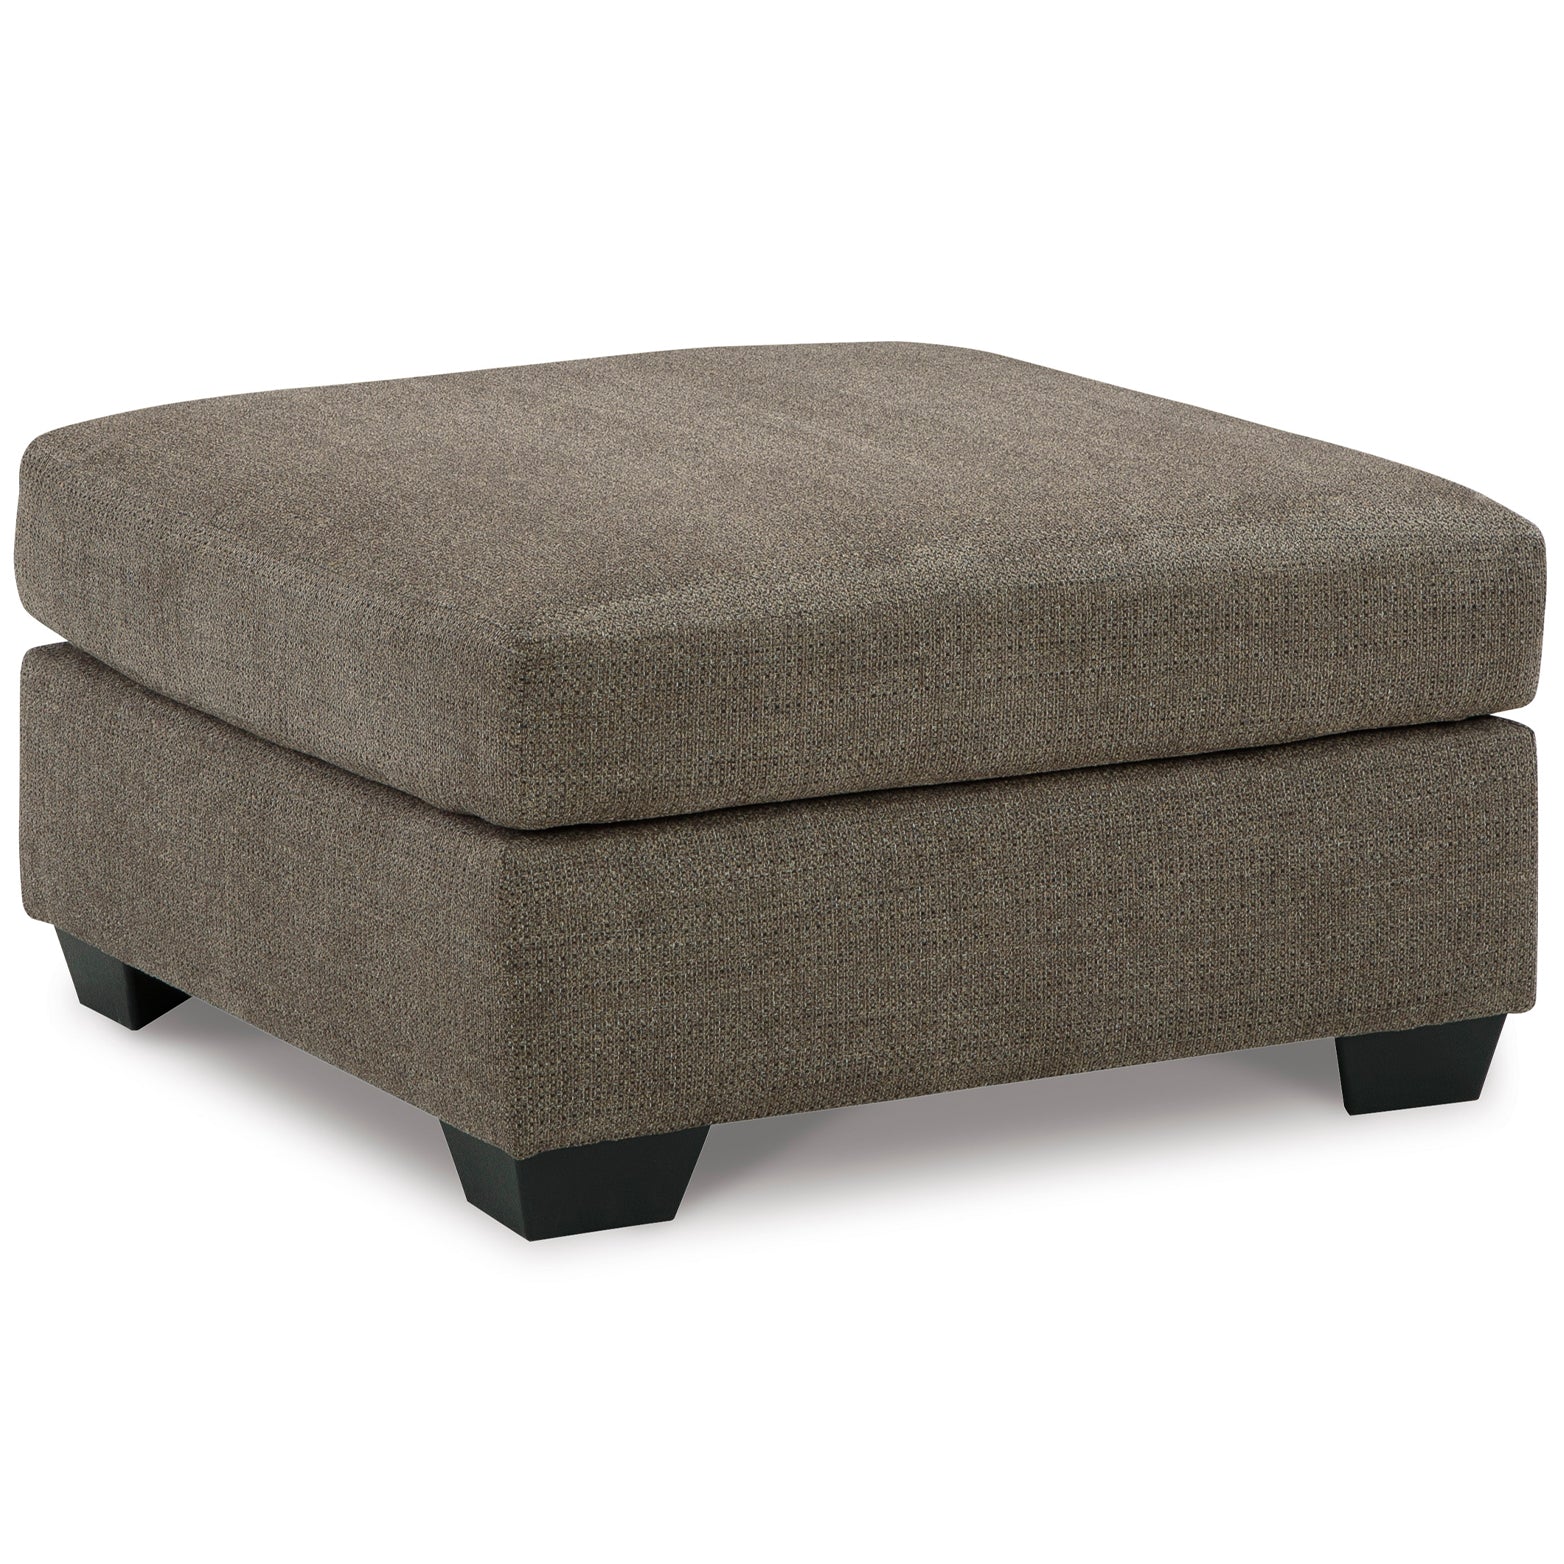 Spacious Mahoney Oversized Accent Ottoman in luxurious chocolate color, perfect for versatile use in living rooms